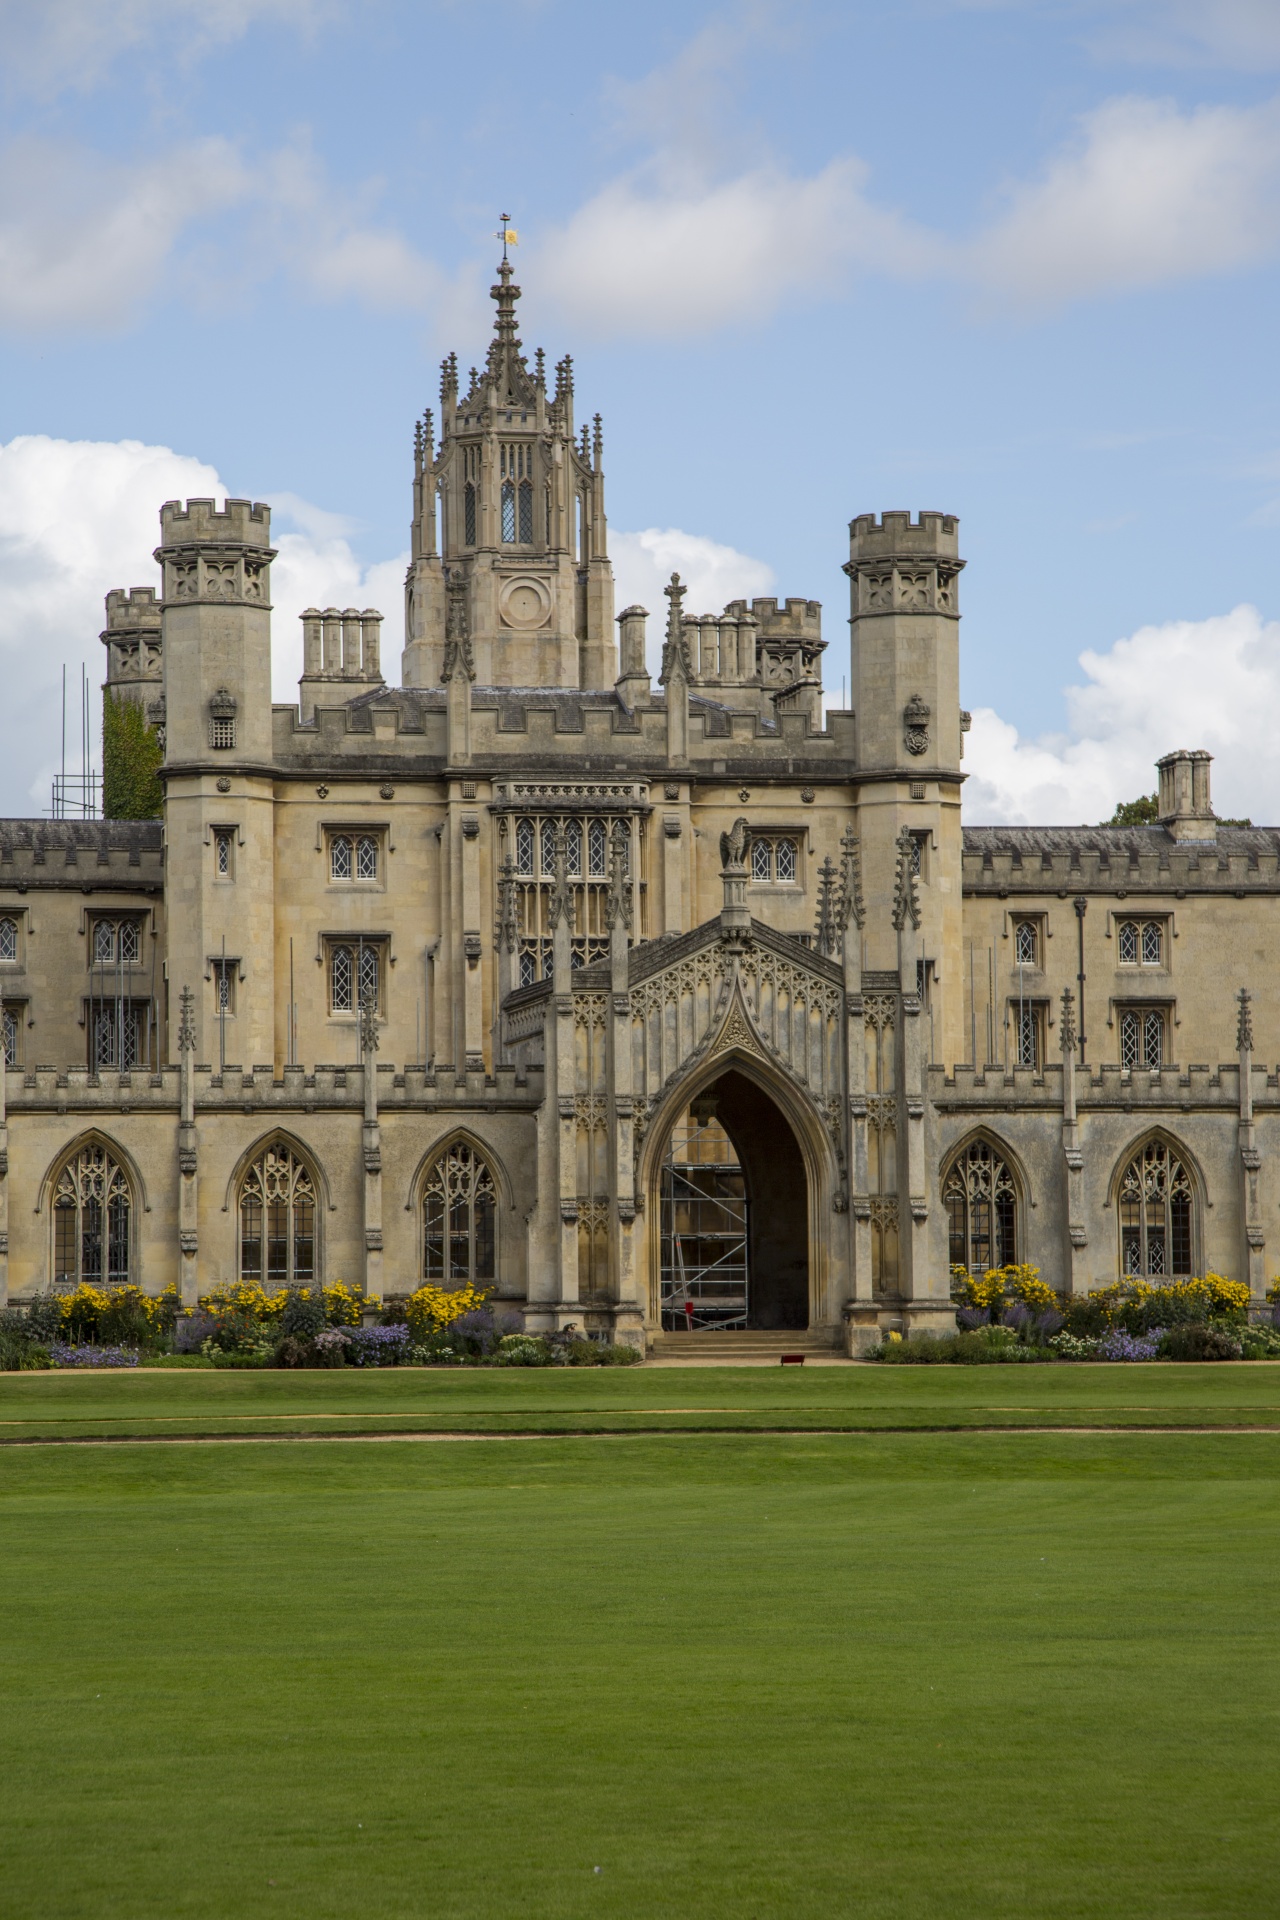 Cambridge is a city on the River Cam in eastern England, home to the prestigious University of Cambridge, dating to 1209. University colleges include King’s, famed for its choir and towering Gothic chapel, as well as Trinity, founded by Henry VIII